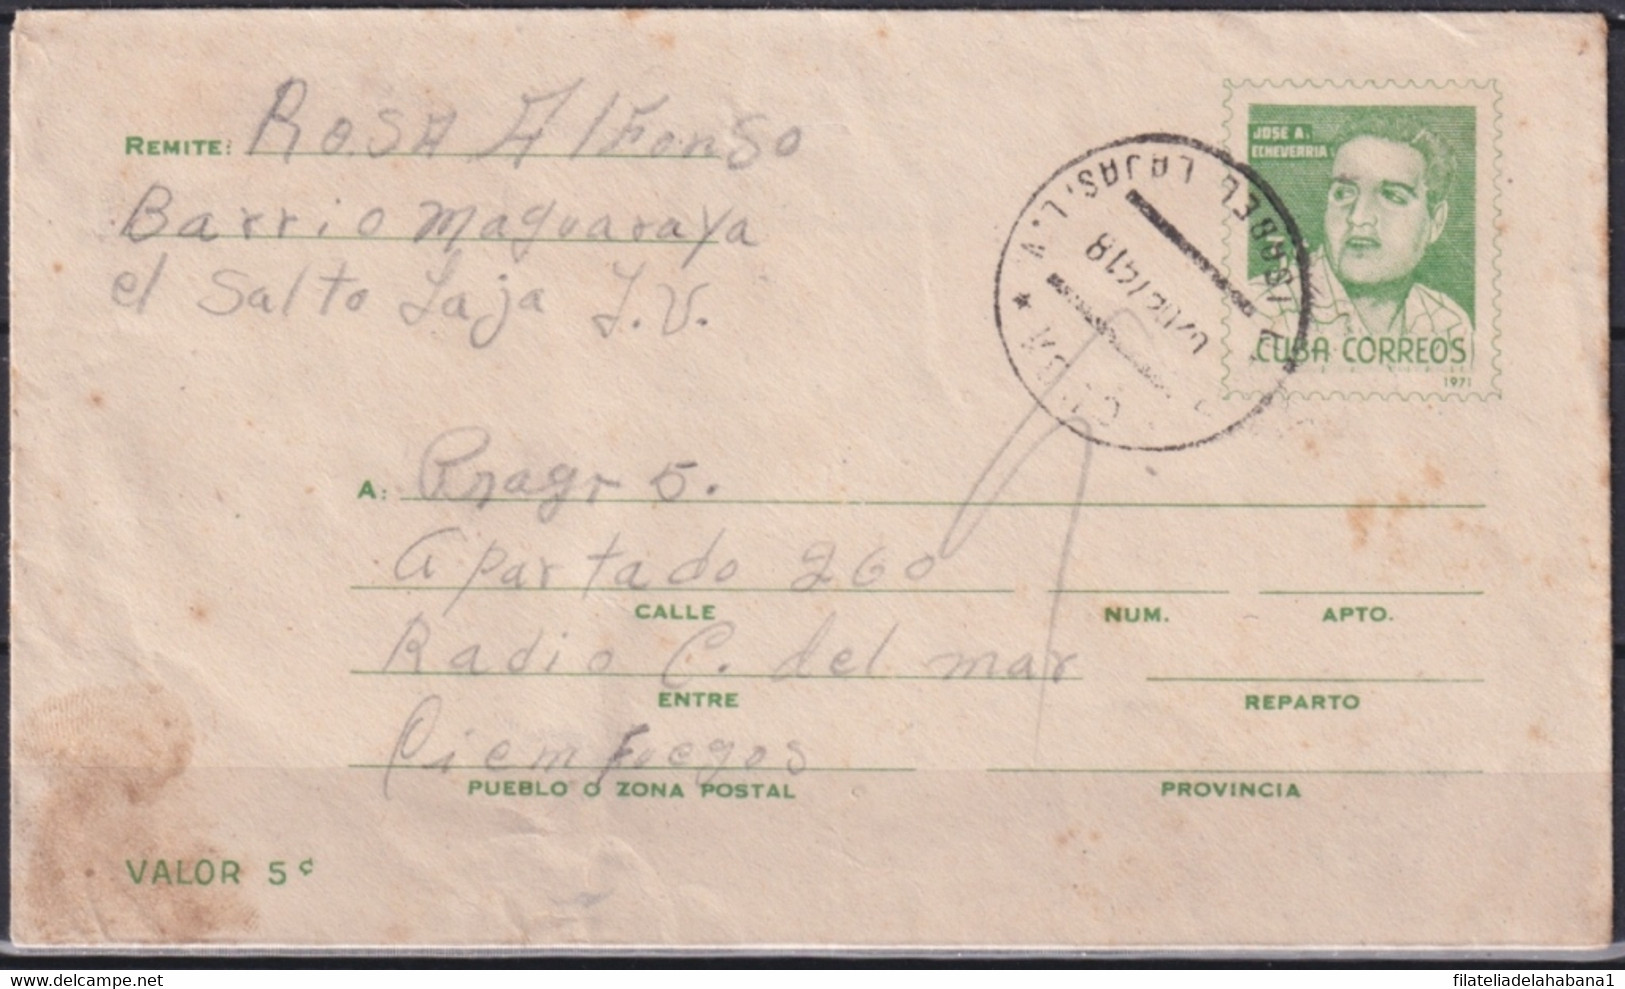 1971-EP-28 CUBA 1971 POSTAL STATIONERY ECHEVARRIA USED STA ISABEL DE LAS LAJAS TO CIENFUEGOS. - Covers & Documents